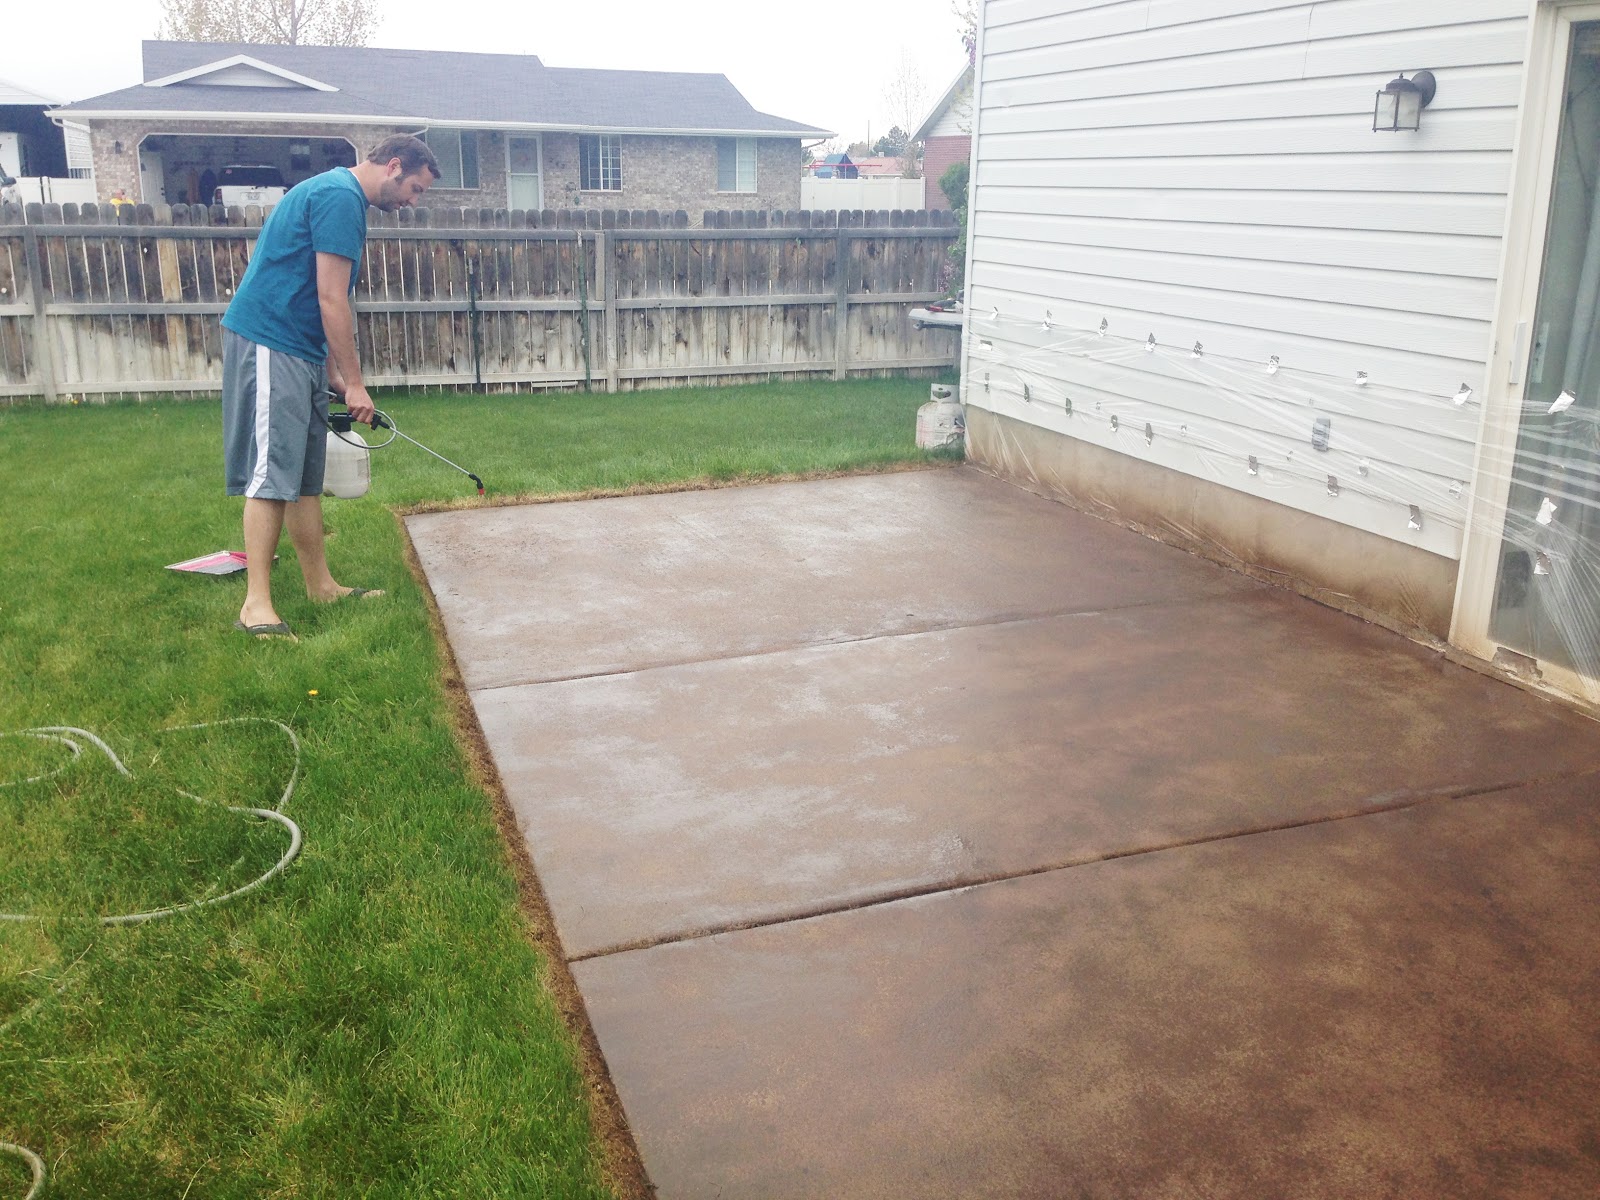 How To Stain A Concrete Patio Chris, How To Stain My Concrete Patio